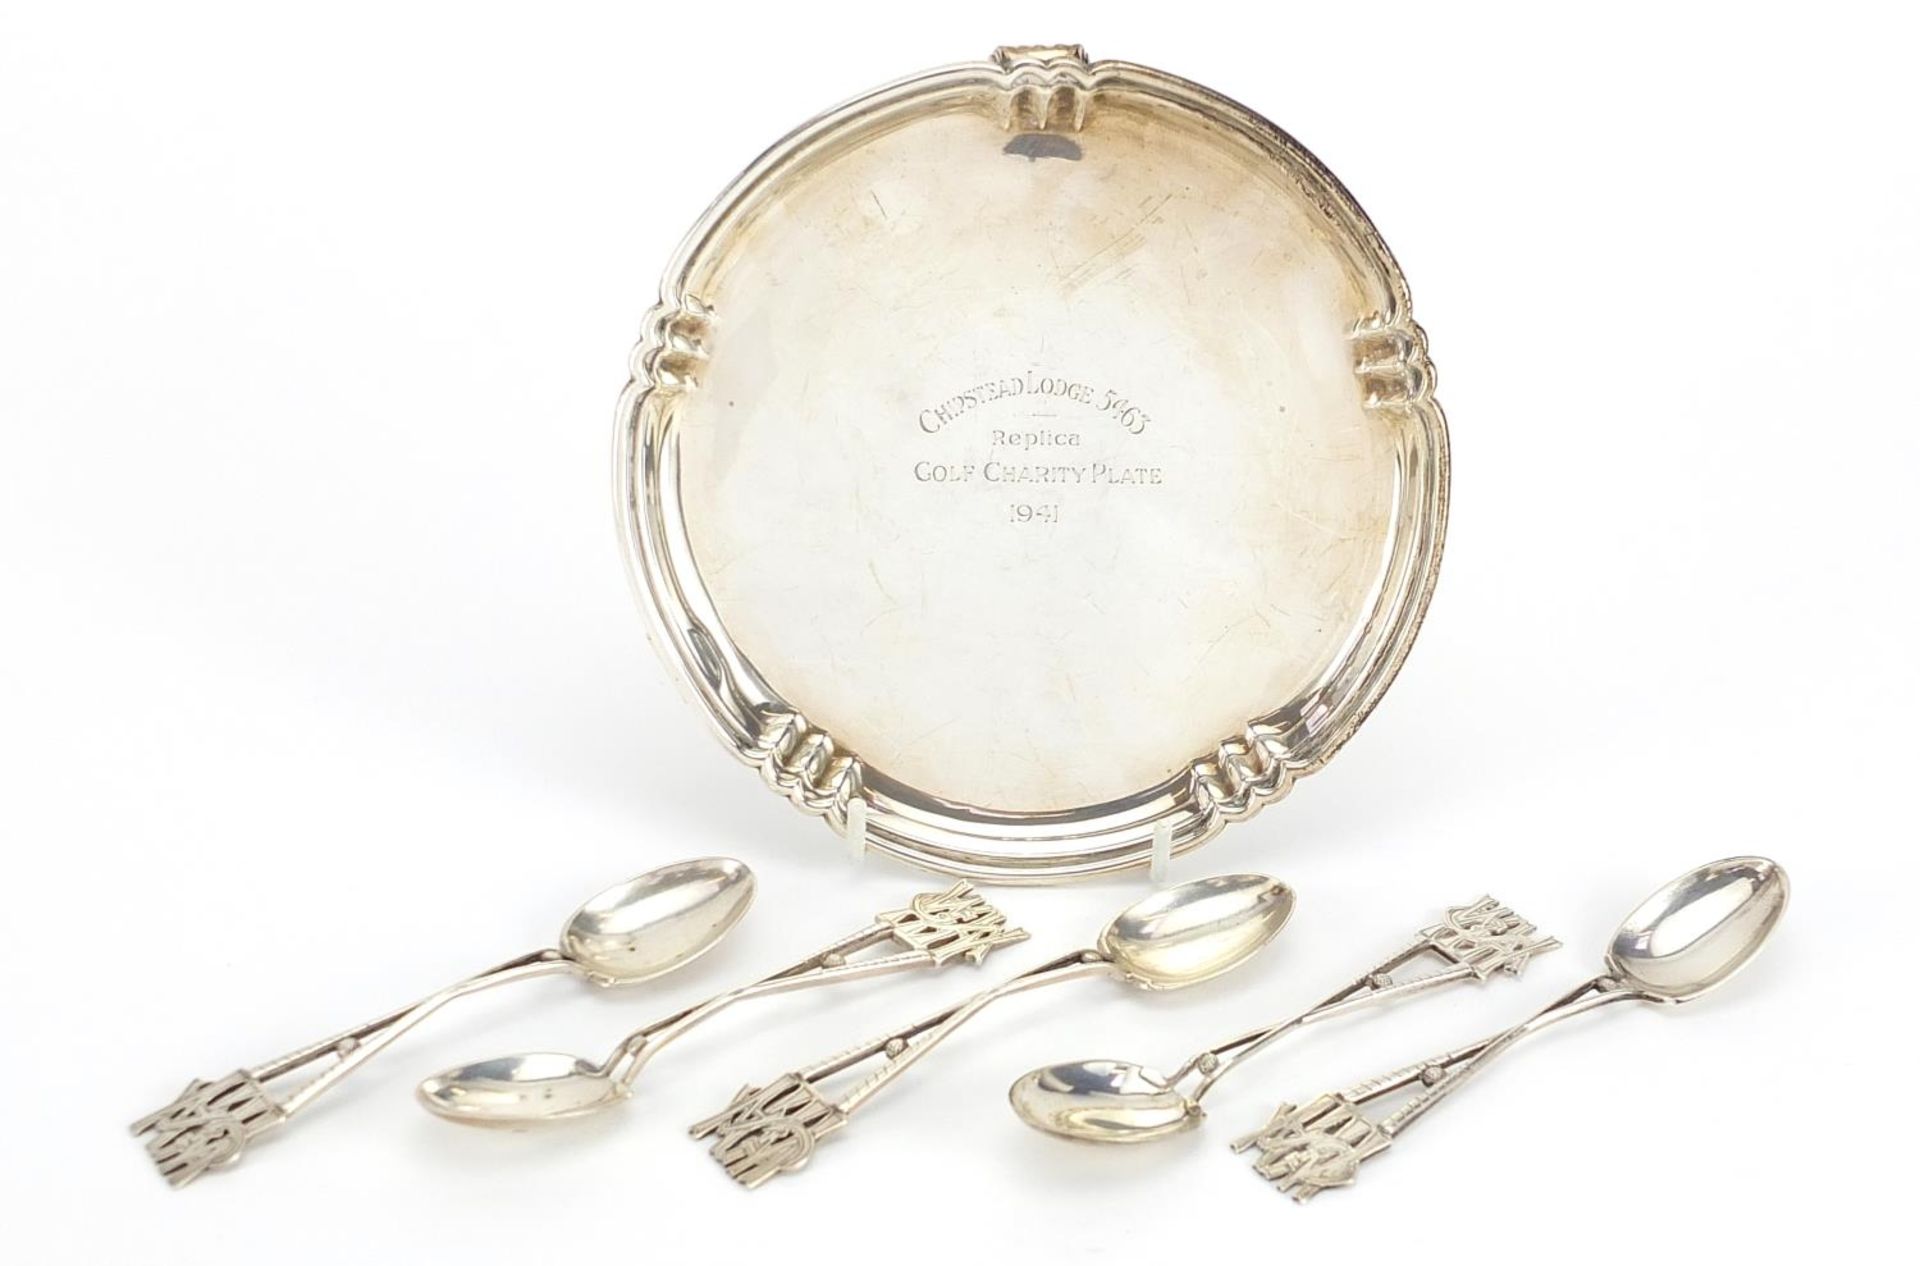 Golfing interest circular silver three footed salver and set of six teaspoons, the salver engraved